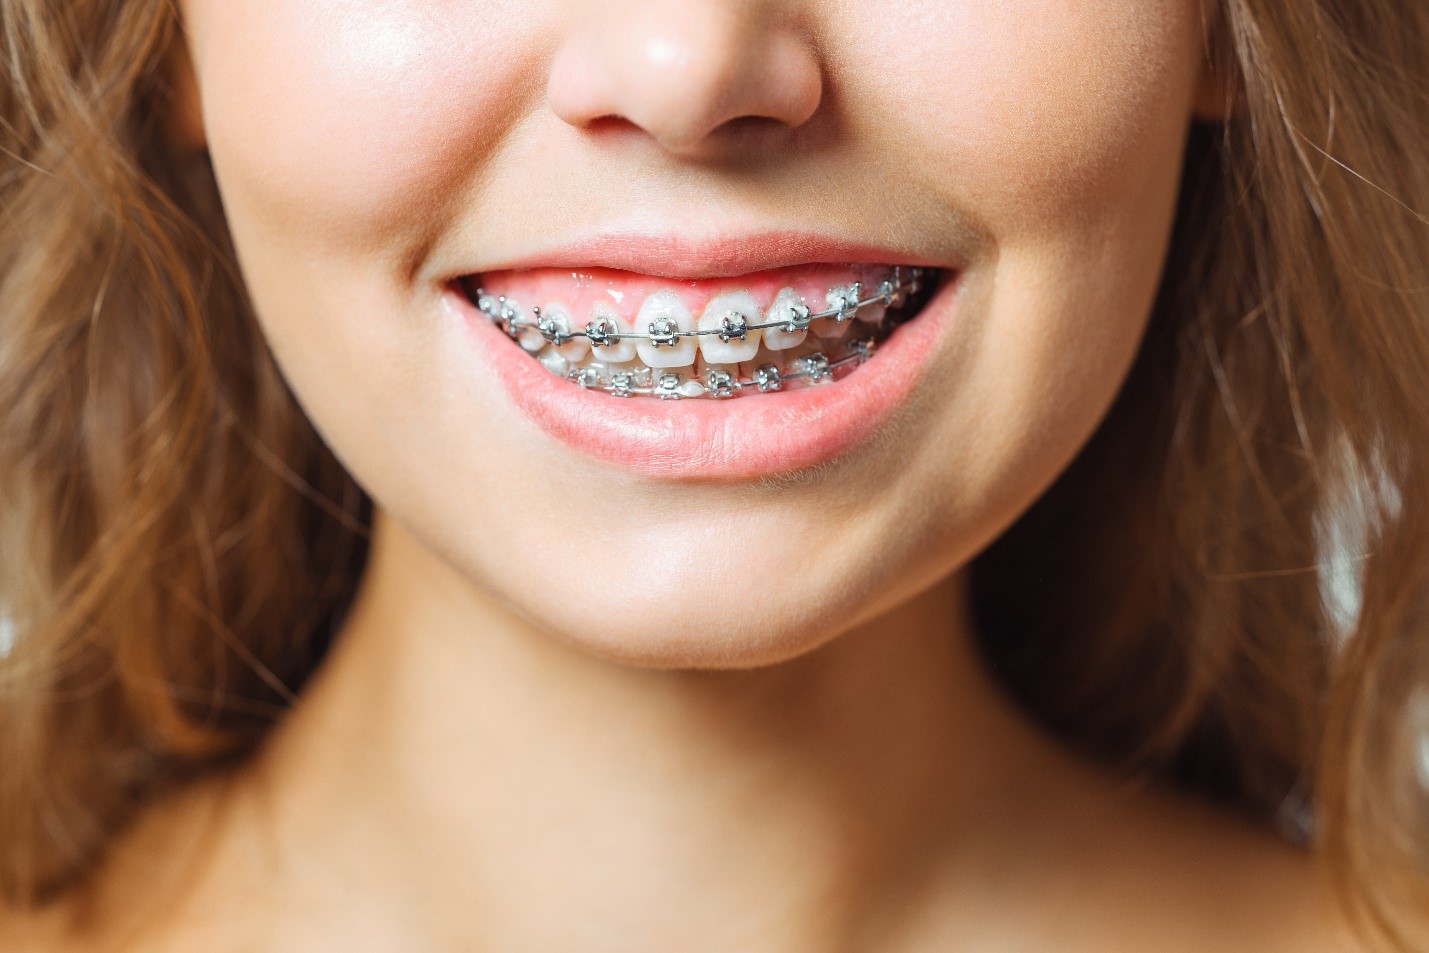 8 Orthodontic Problems That Invisalign Treatments Solve